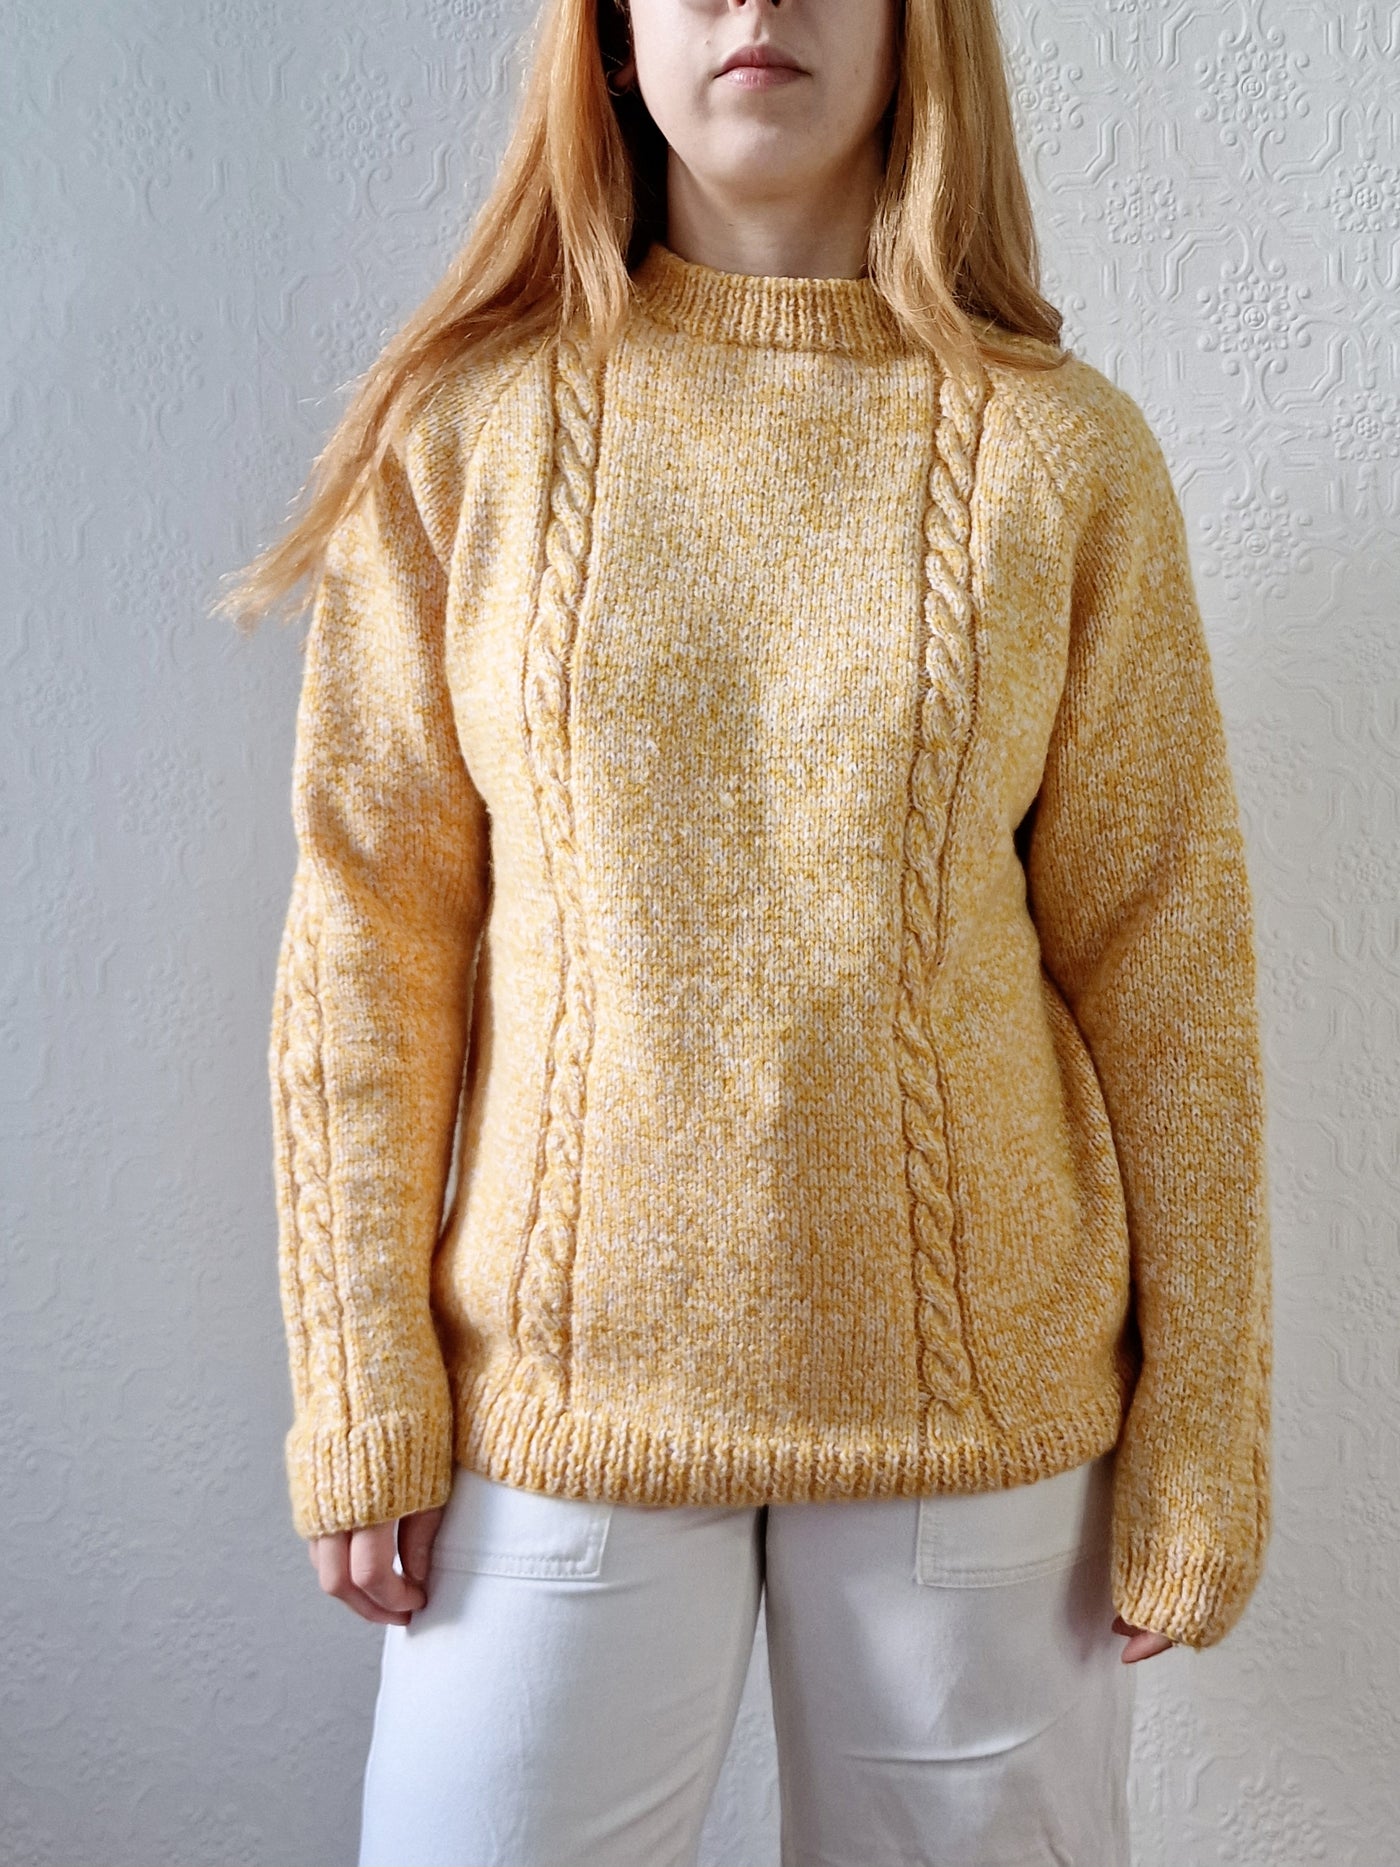 Vintage 90s Mustard Yellow Aran Style Cable Knit Jumper with Crew Neck - M